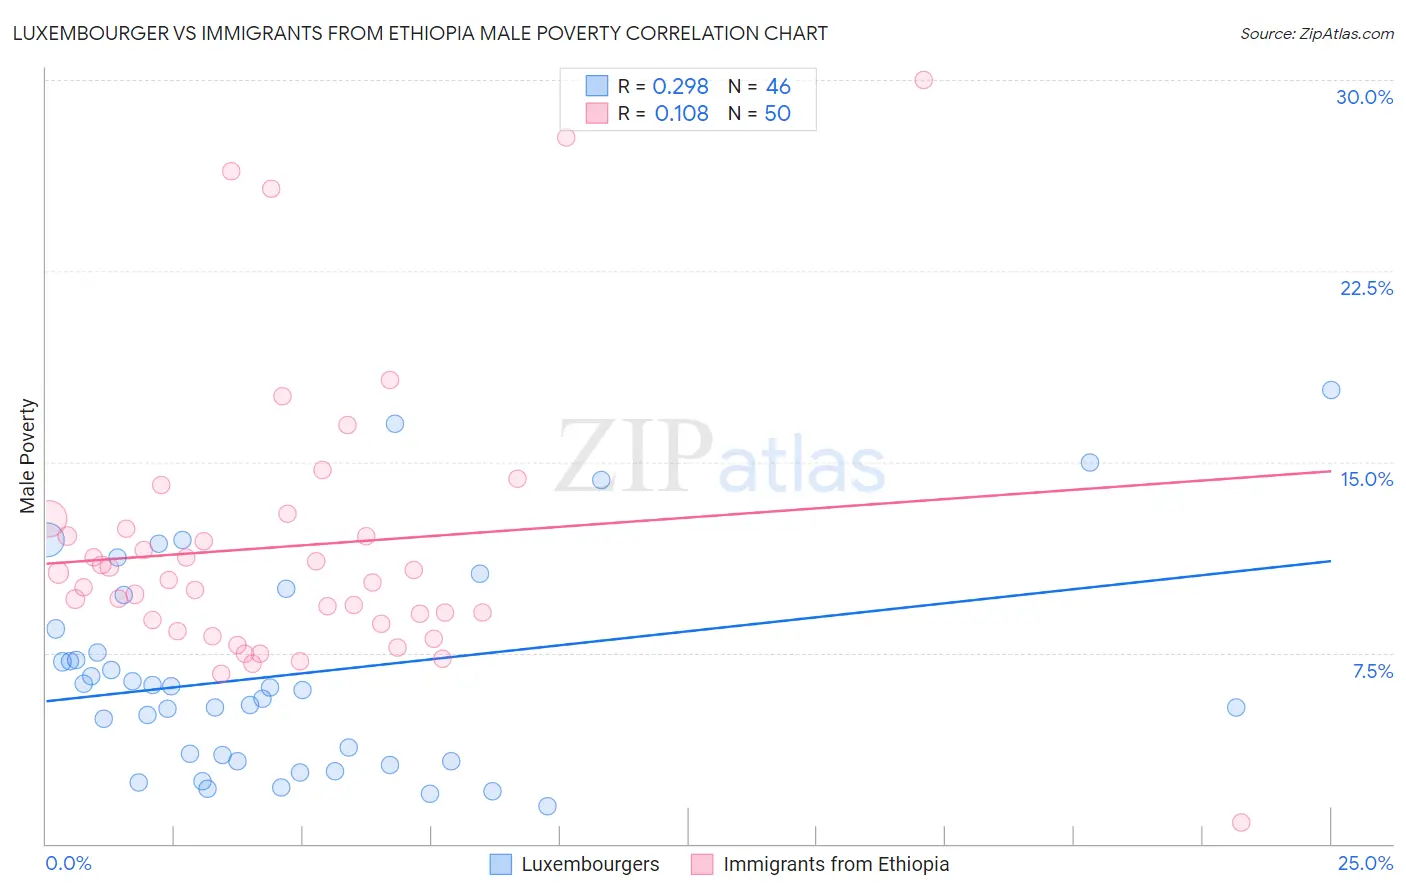 Luxembourger vs Immigrants from Ethiopia Male Poverty